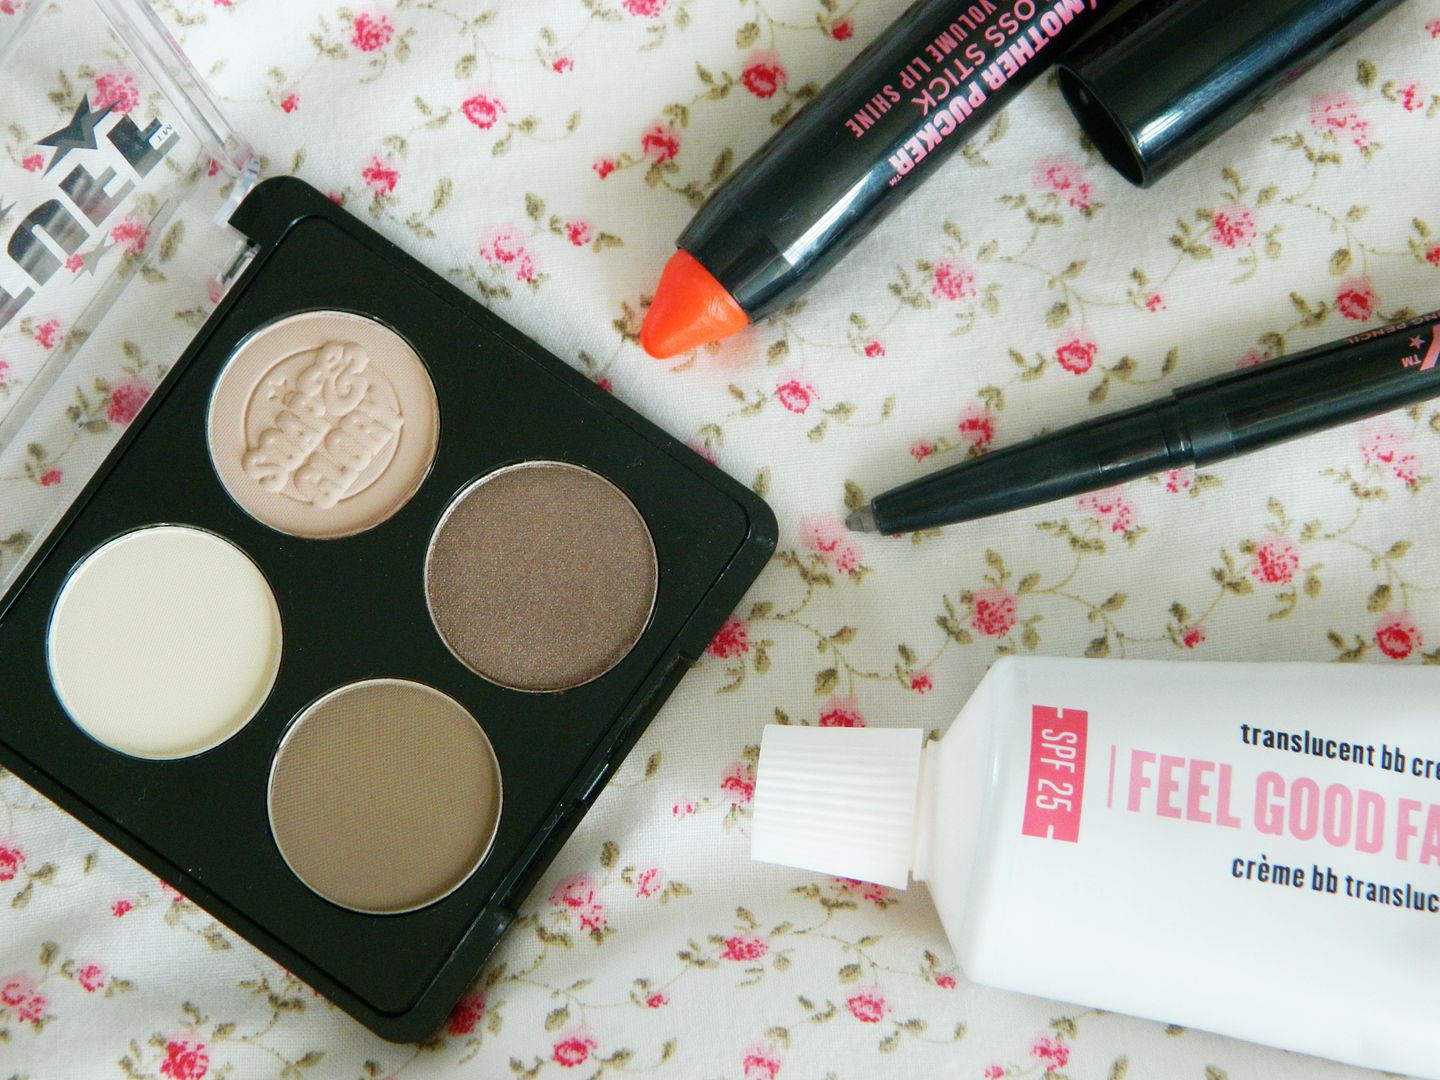 Collective Beauty And Makeup Haul Spring 2014 Soap And Glory Lid Stuff Whats Nude Gloss Stick Fuchsia-Ristic Archery Brownie Points Feel Good Factor Tube Belle-amie UK Beauty Fashion Lifestyle Blog